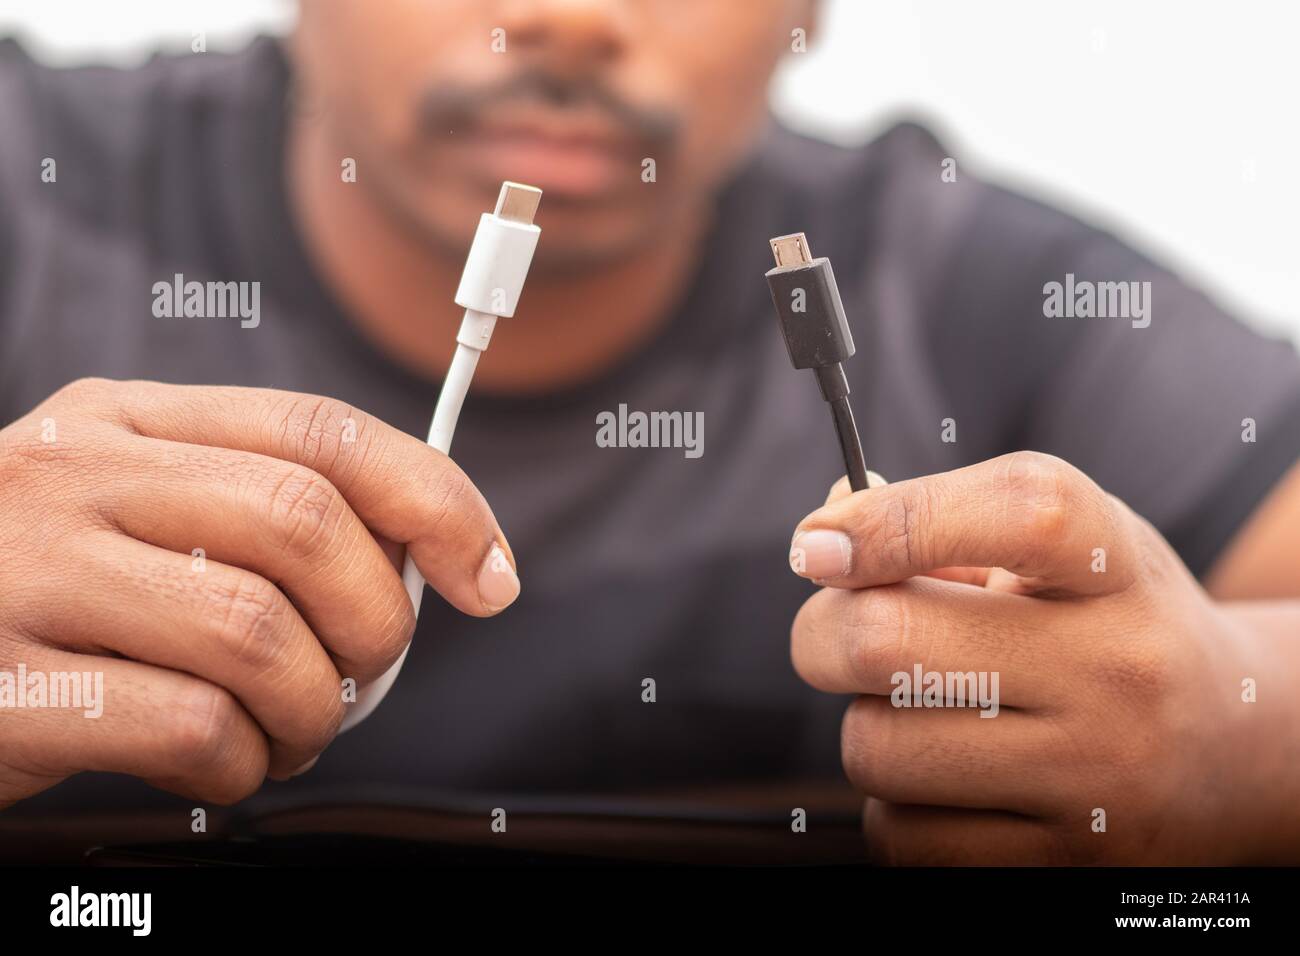 Selective focus on hands holding micro usb and USB type C ports concepts showing of confusion on charging ports. Stock Photo